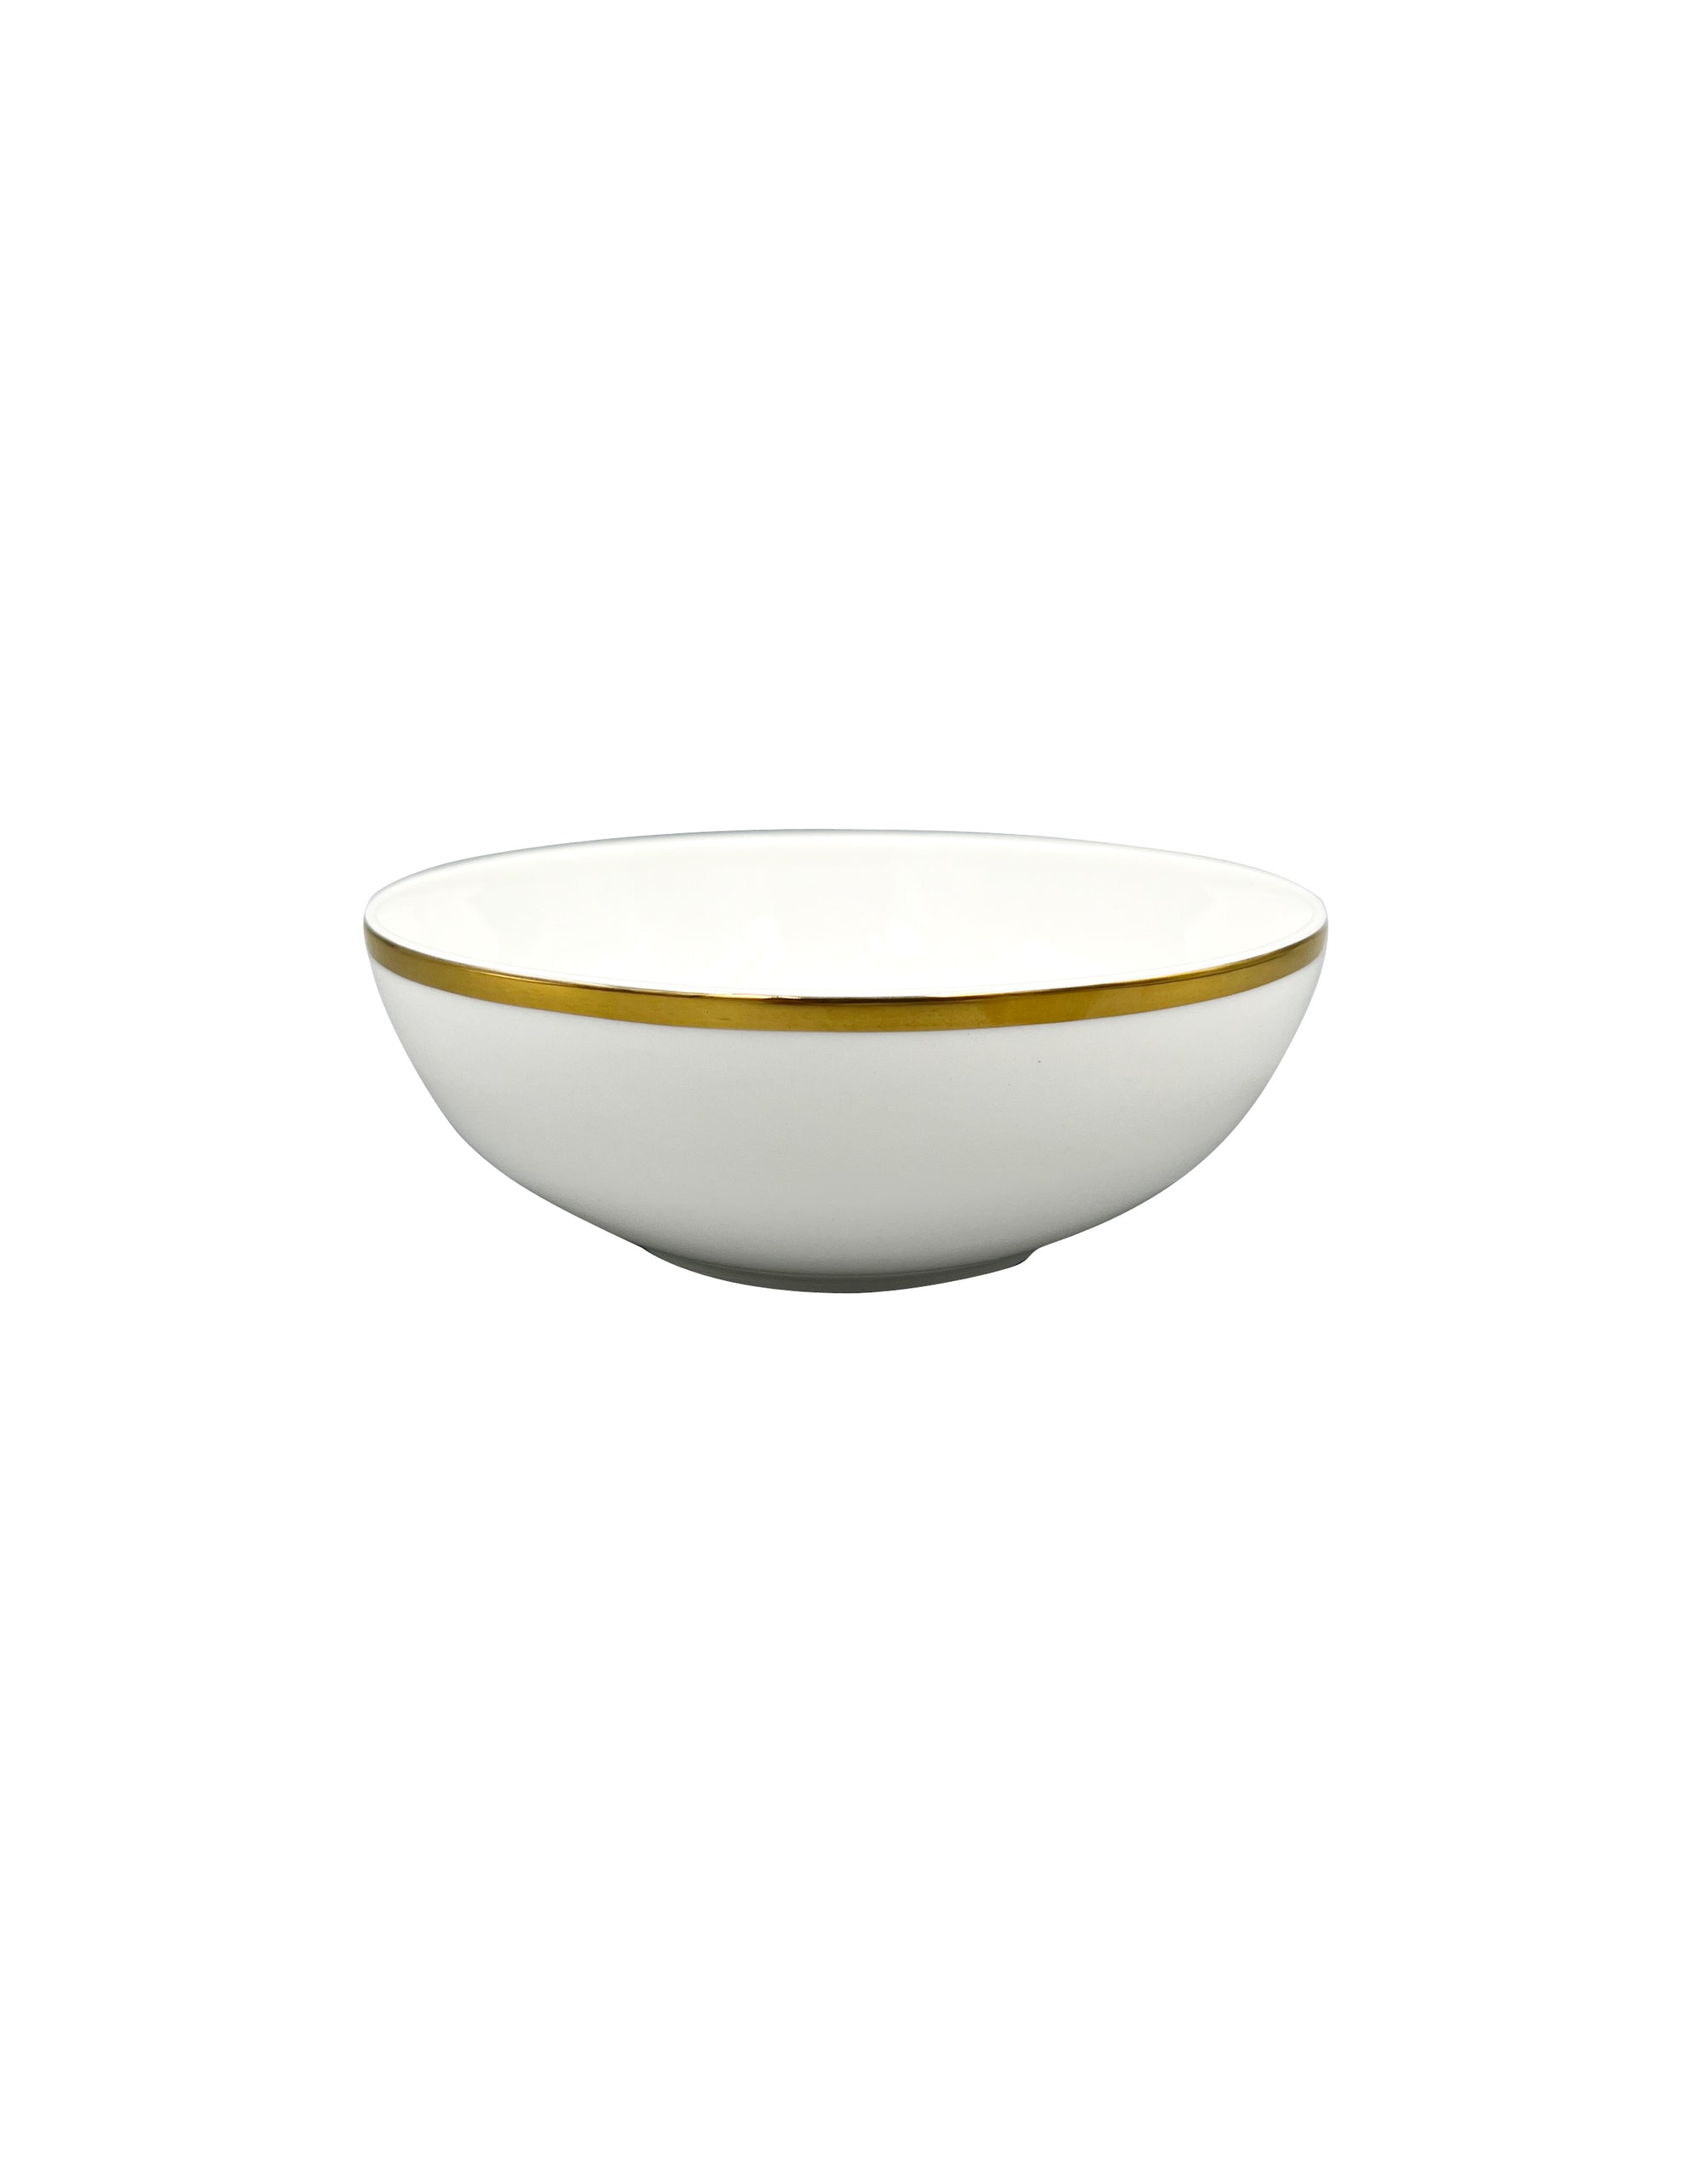 Prouna Comet Gold Cereal Bowl White Background Photo